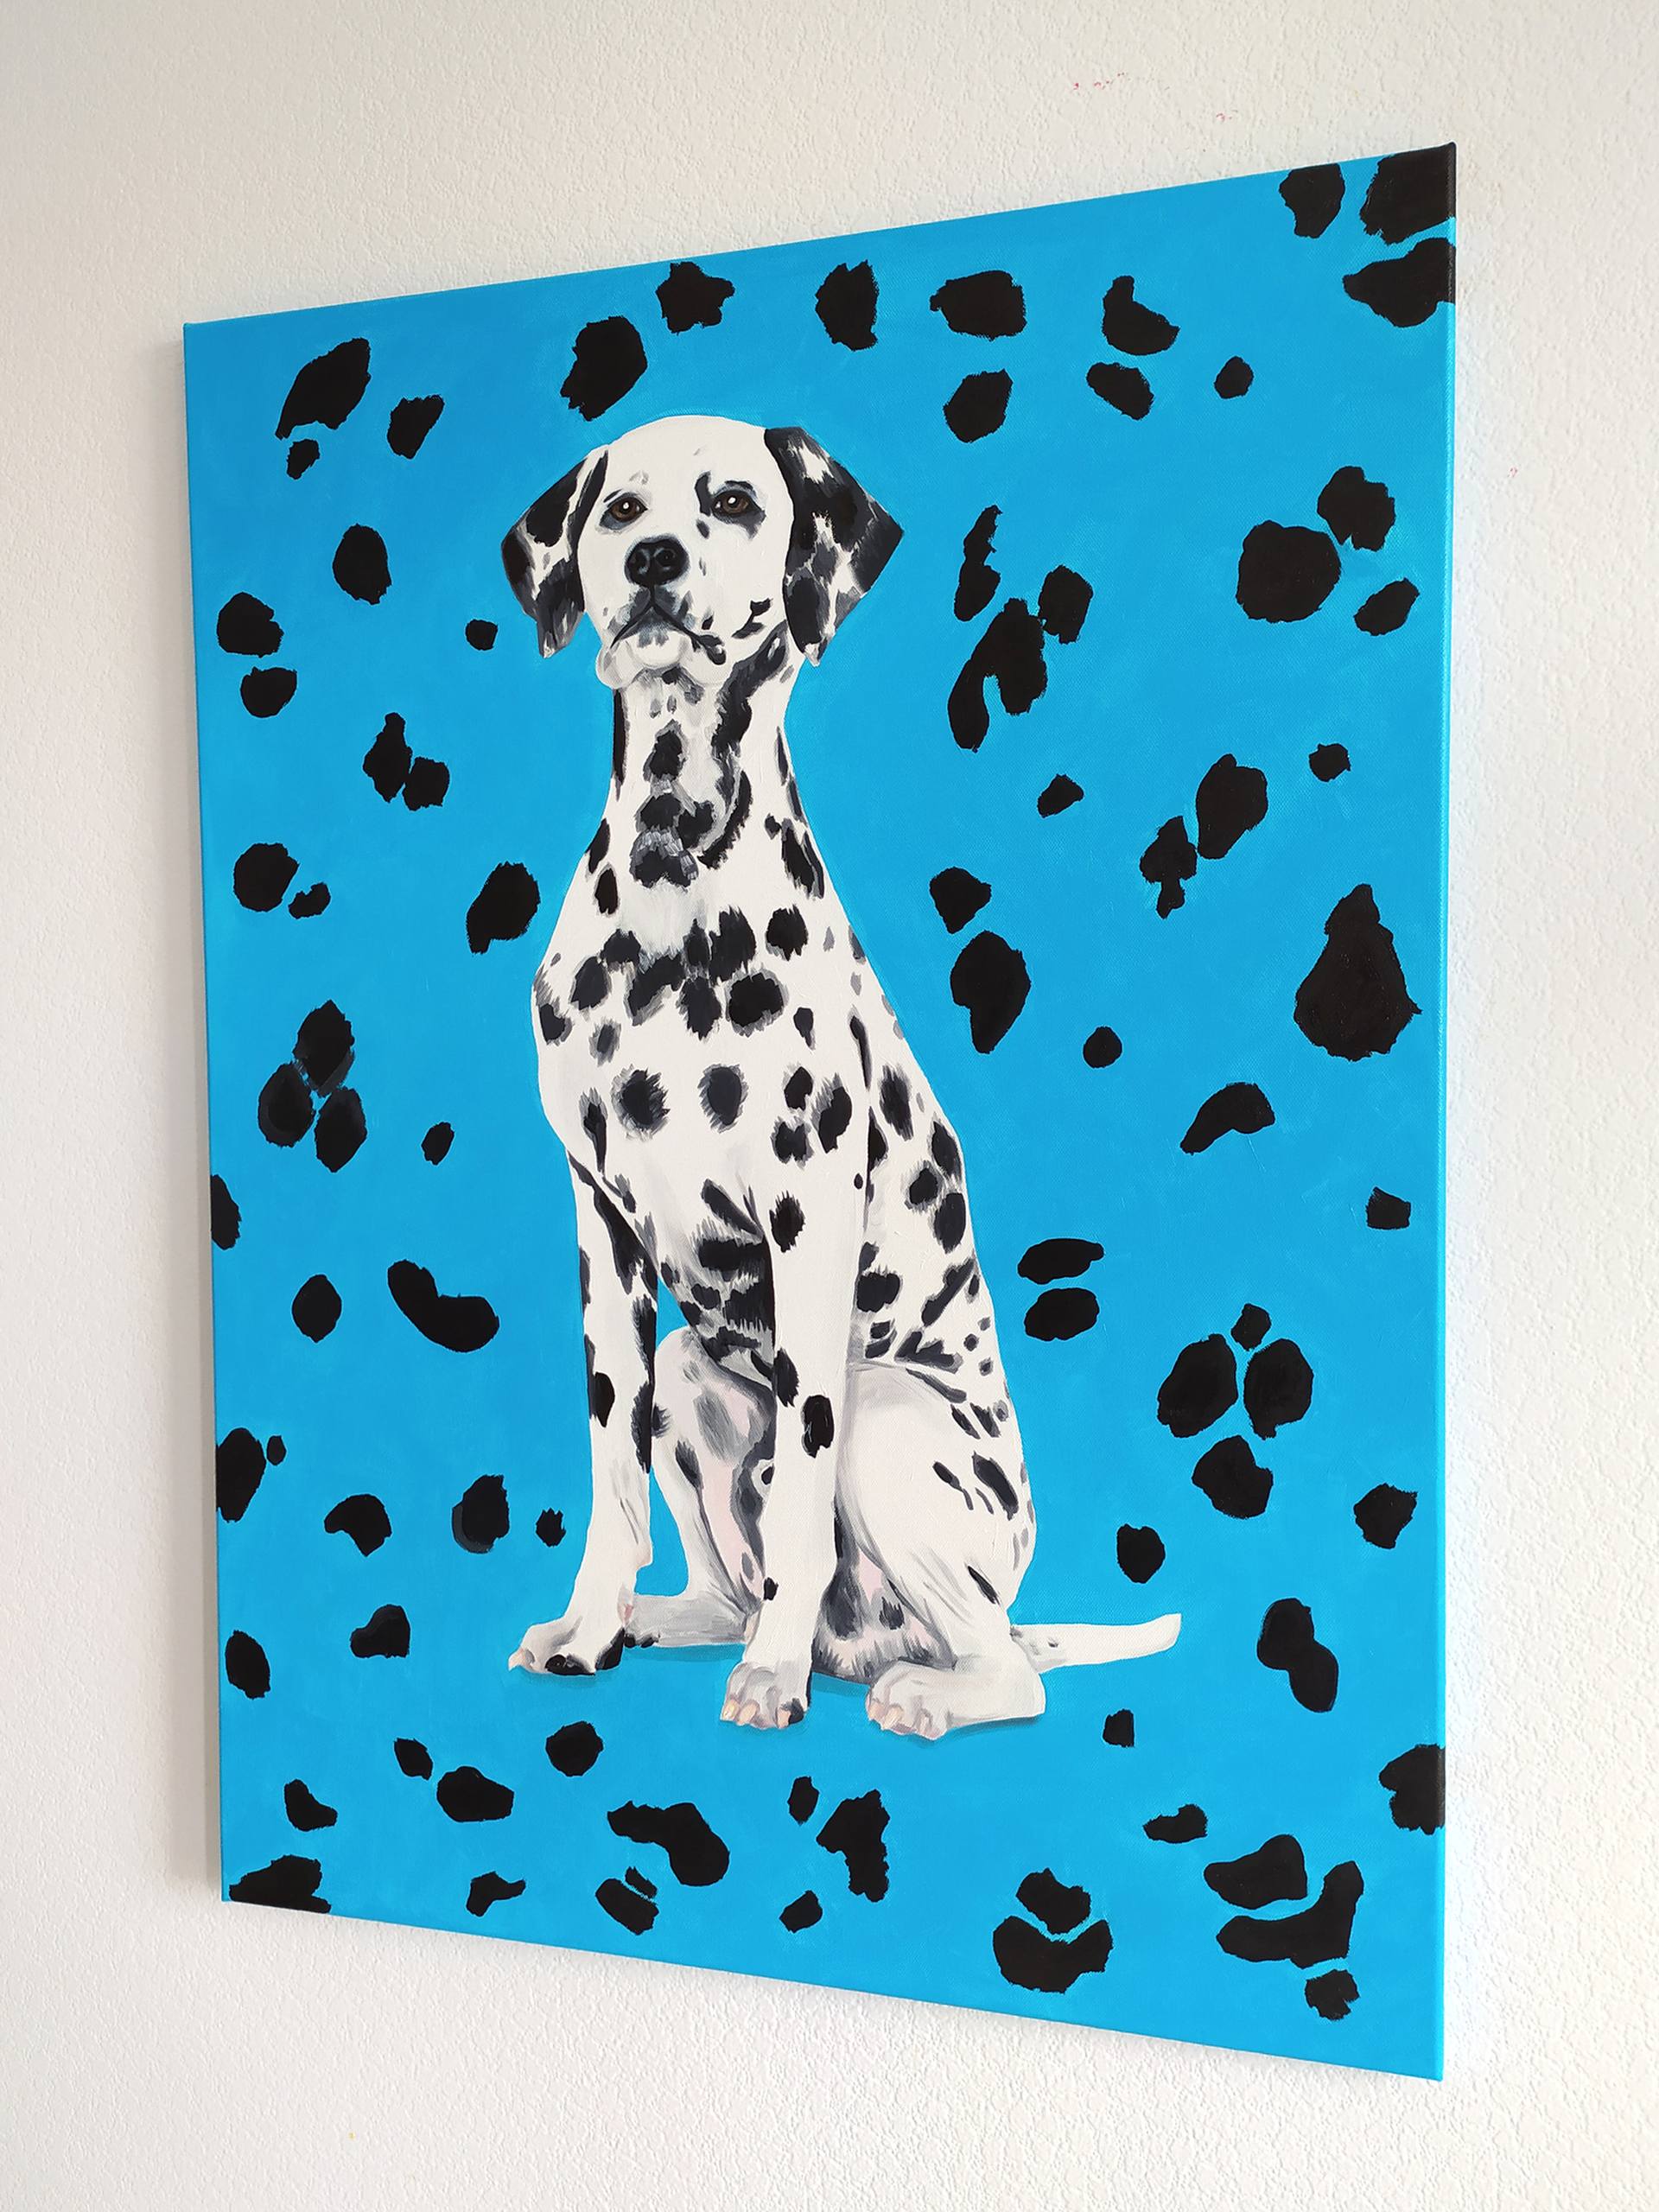 Details about   art direct from artist painting figures dalmatian dog animal original painter 